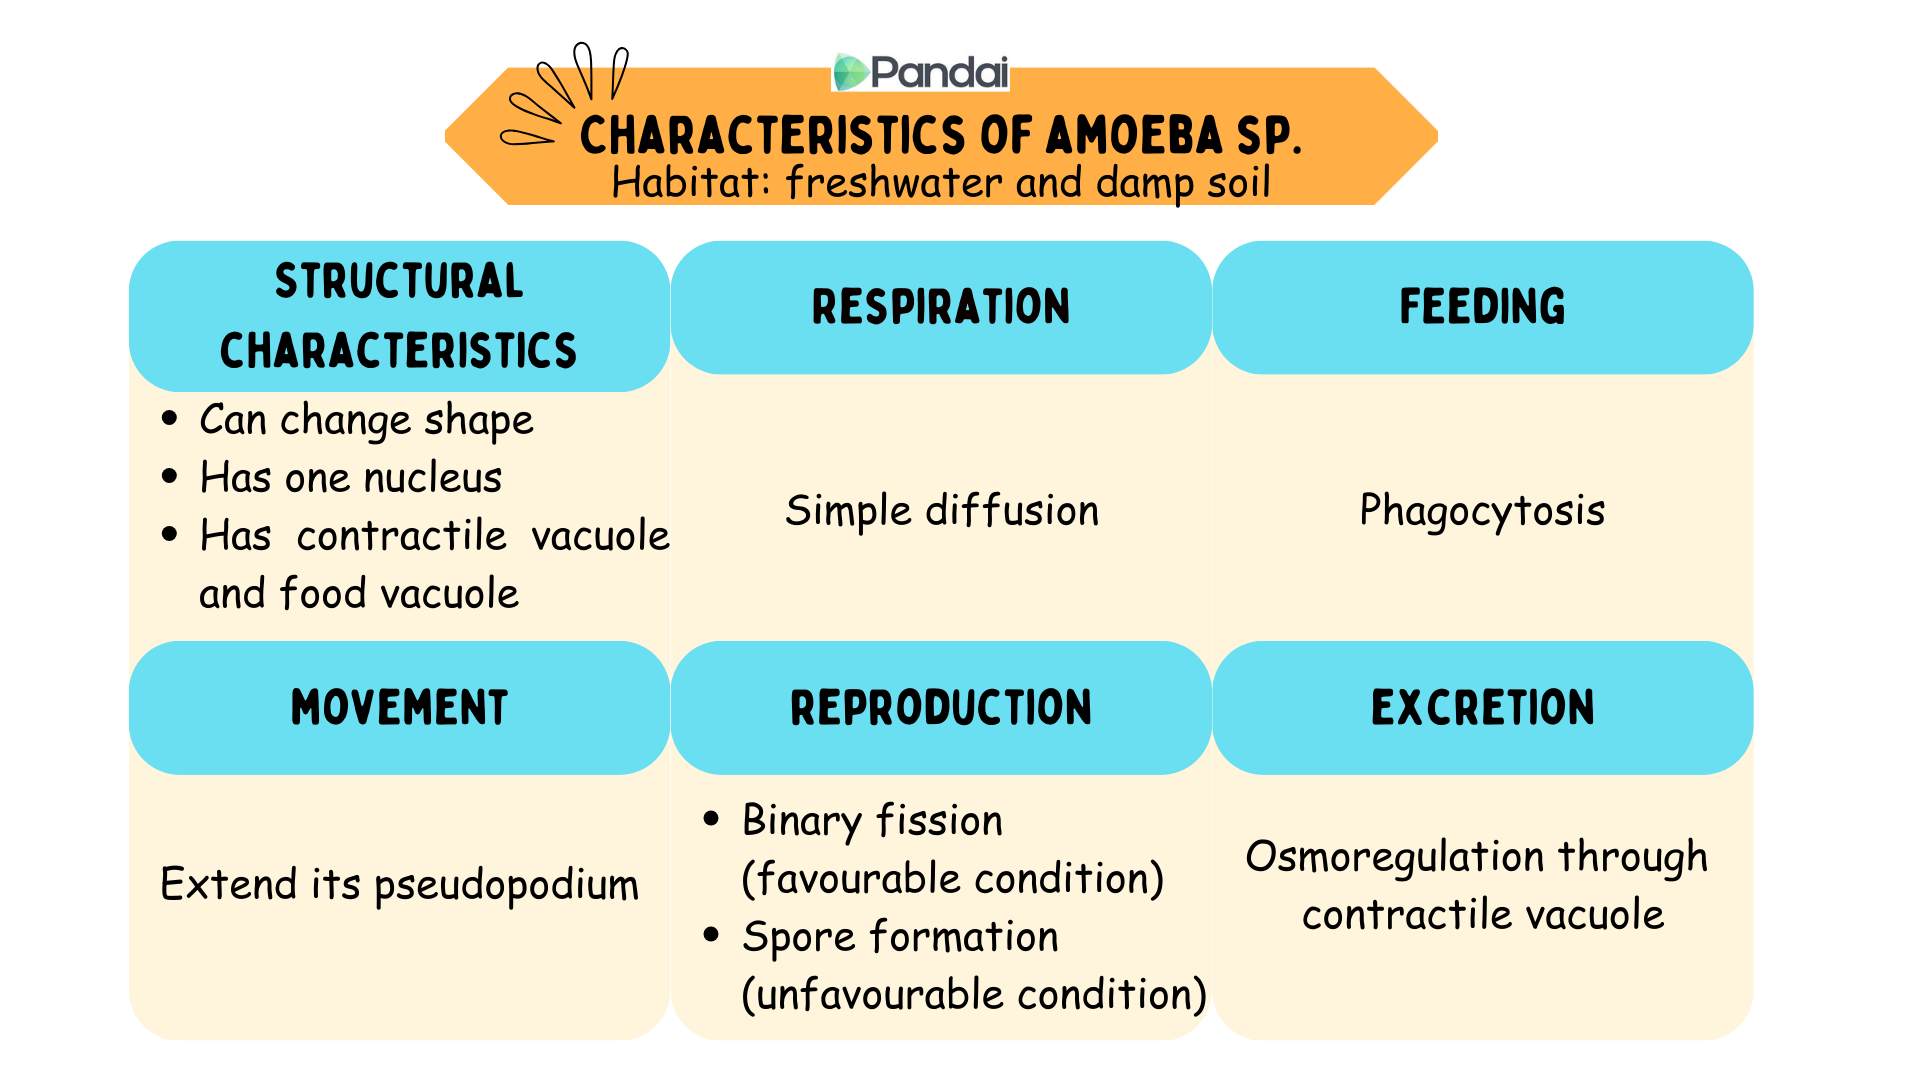 This image is a chart detailing the characteristics of Amoeba sp., which inhabit freshwater and damp soil. The chart is divided into six categories: 1. Structural Characteristics: - Can change shape - Has one nucleus - Has contractile vacuole and food vacuole 2. Respiration: - Simple diffusion 3. Feeding: - Phagocytosis 4. Movement: - Extend its pseudopodium 5. Reproduction: - Binary fission (favorable condition) - Spore formation (unfavorable condition) 6. Excretion: - Osmoregulation through contractile vacuole 